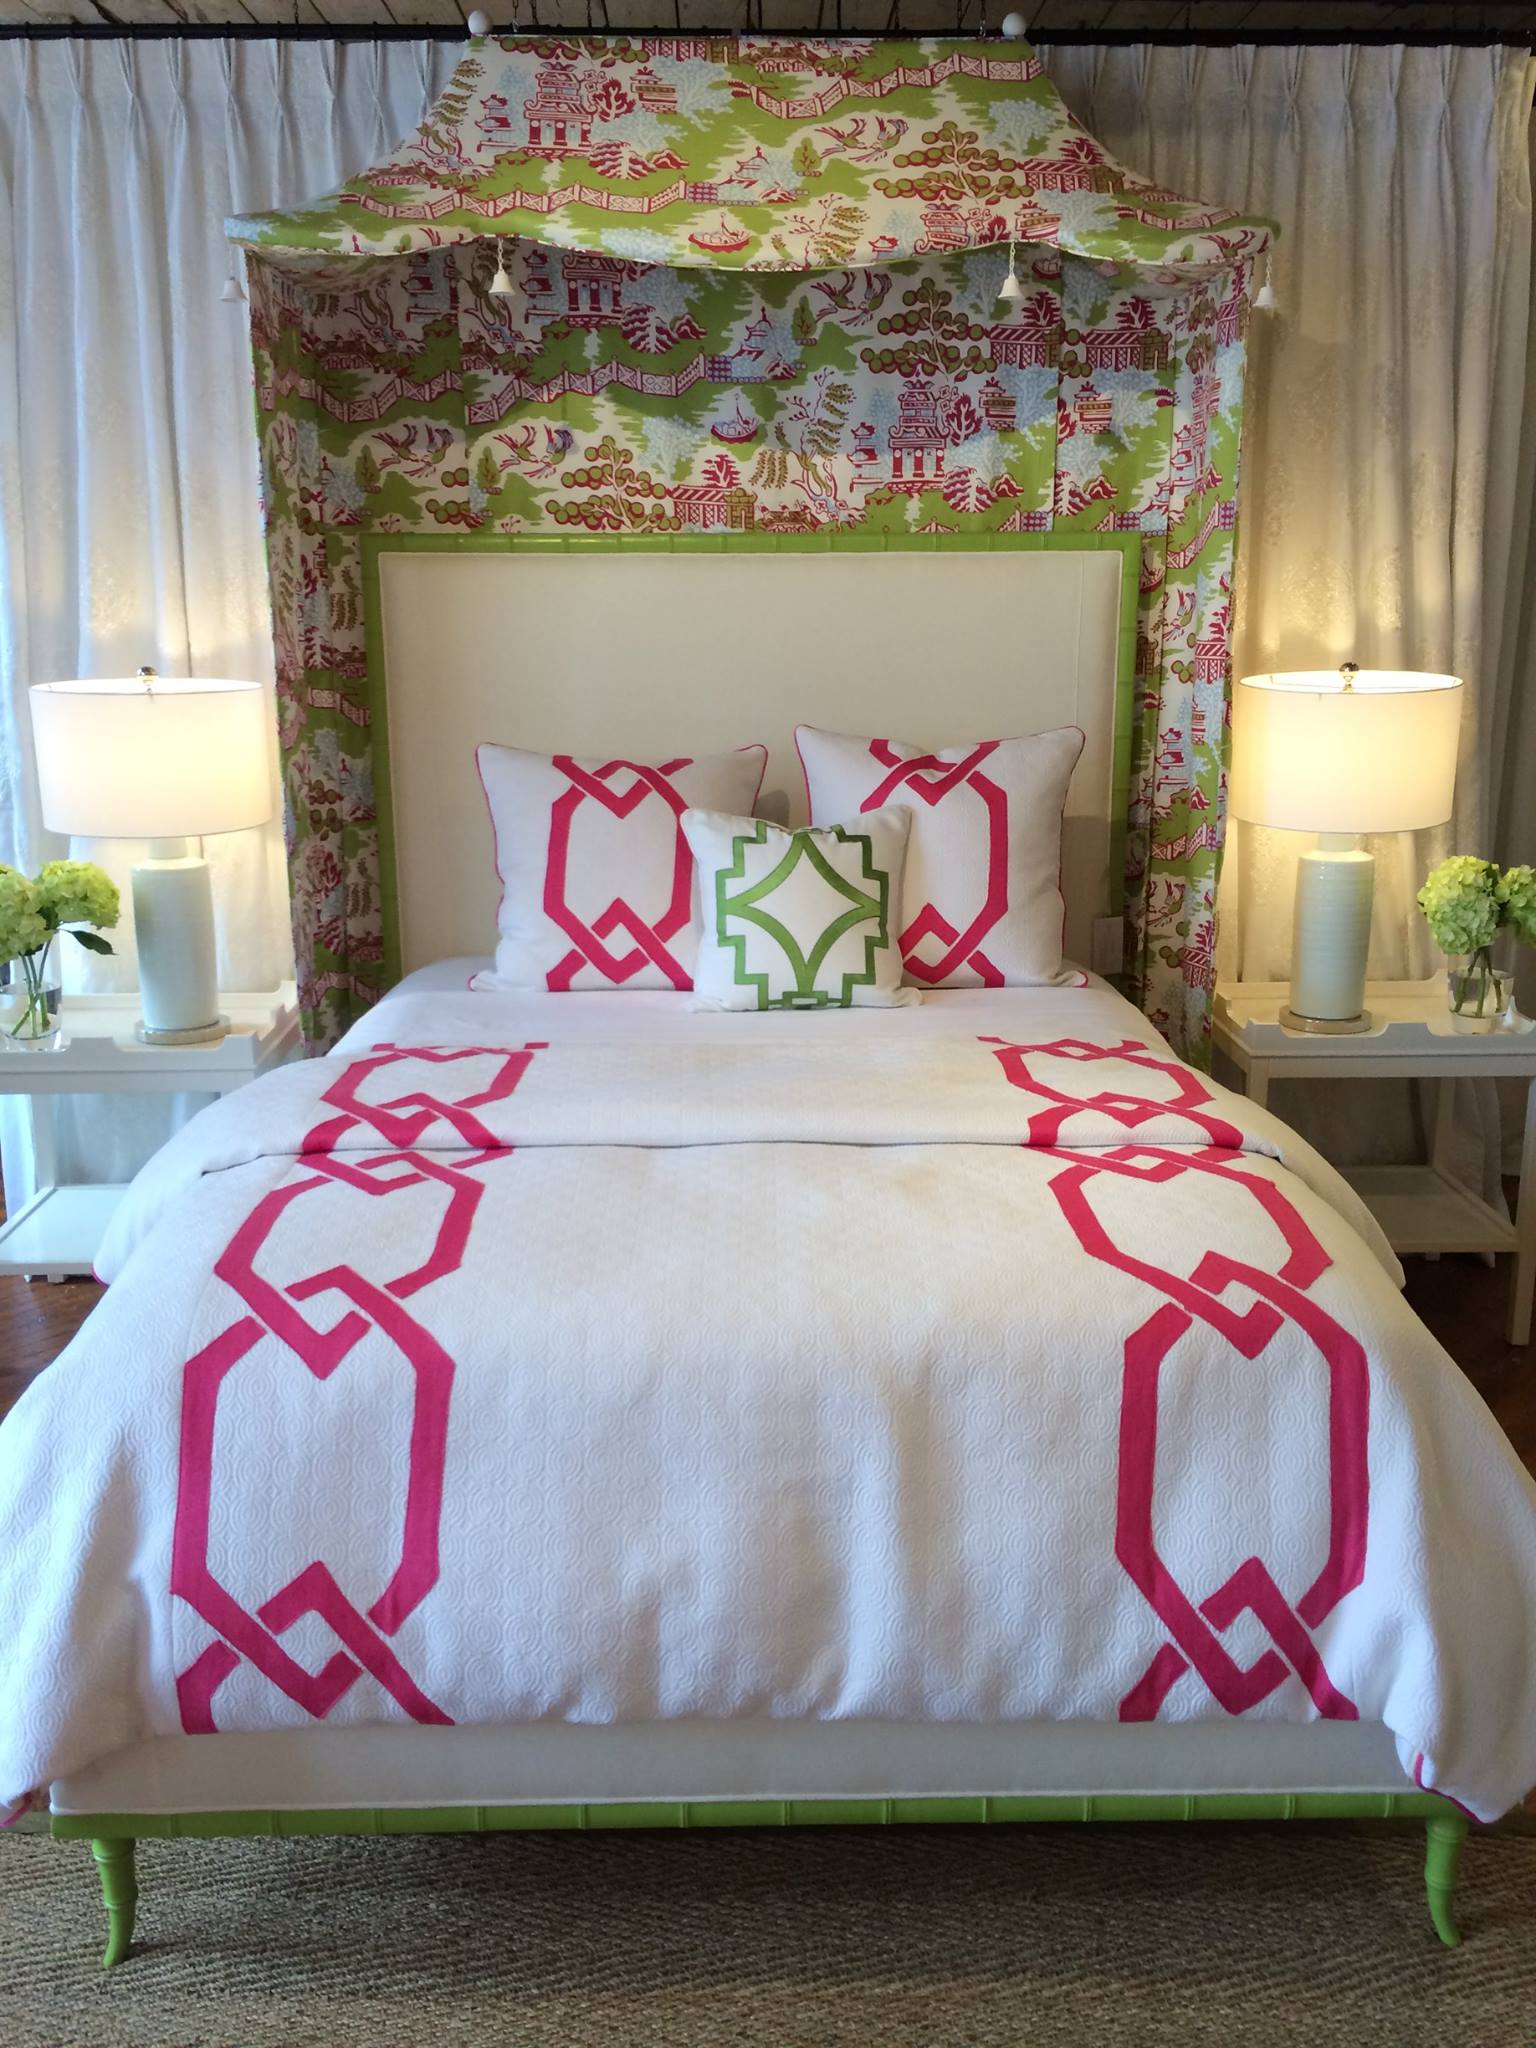 Luzon Fabric You Can Customize Thibaut Furniture With Benjamin Moore